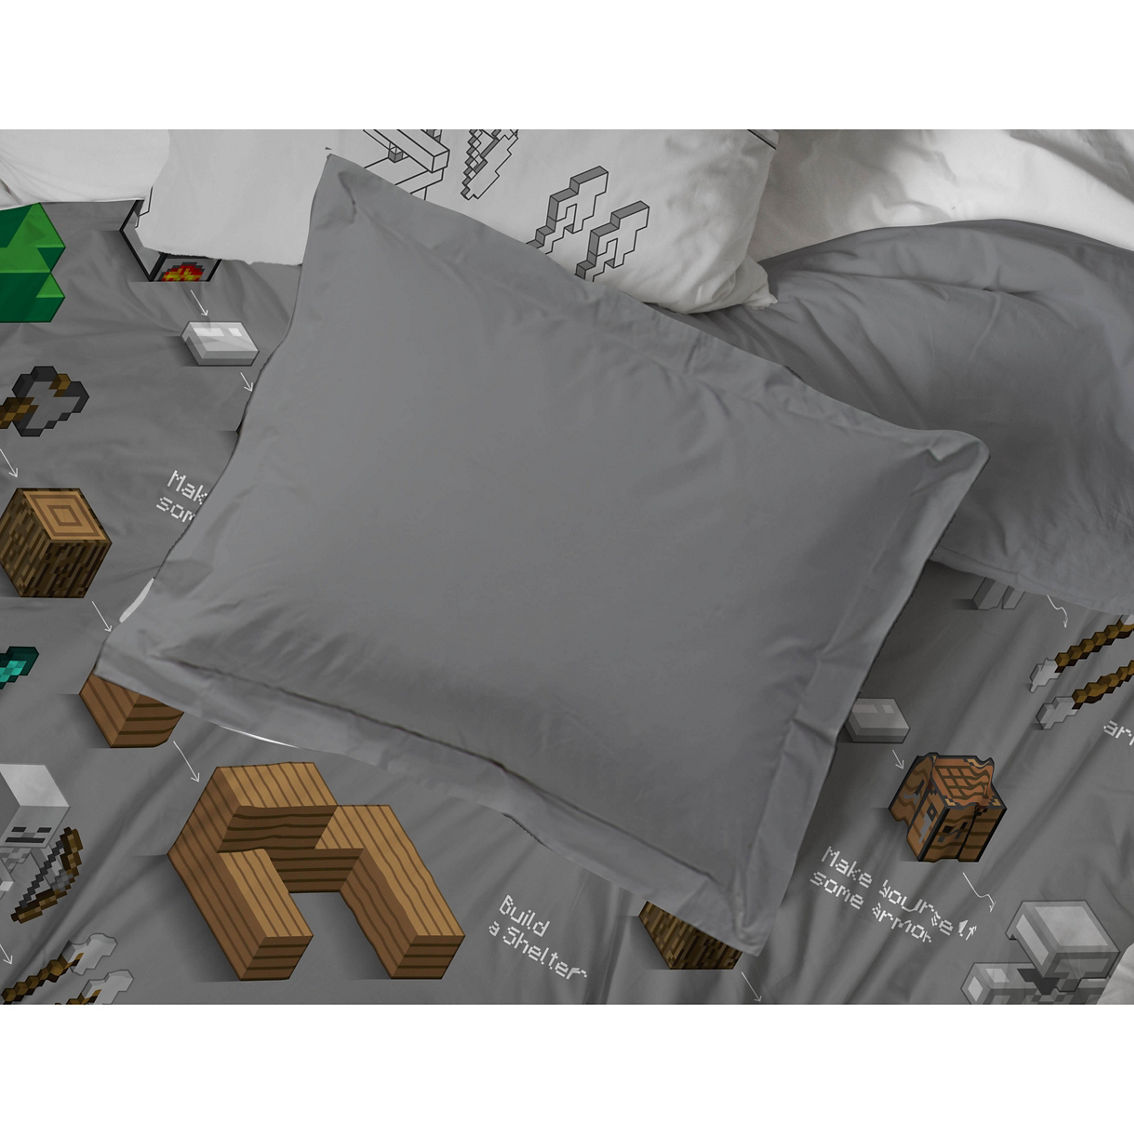 Minecraft Survive Twin Bed Set - Image 5 of 5